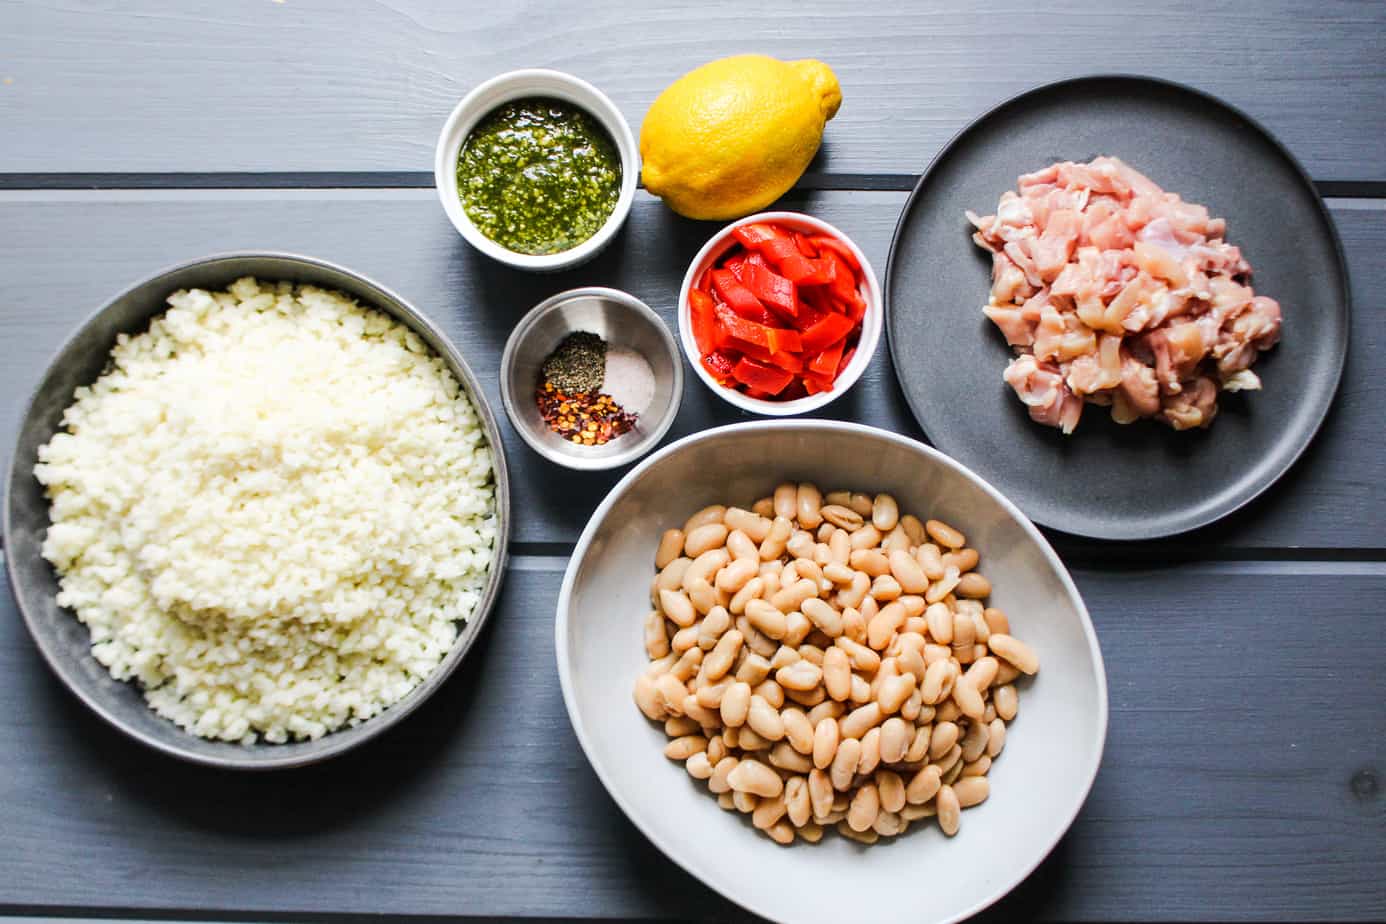 ingredients: cauliflower rice, pesto, spices, lemon, roasted red peppers, chicken, white beans